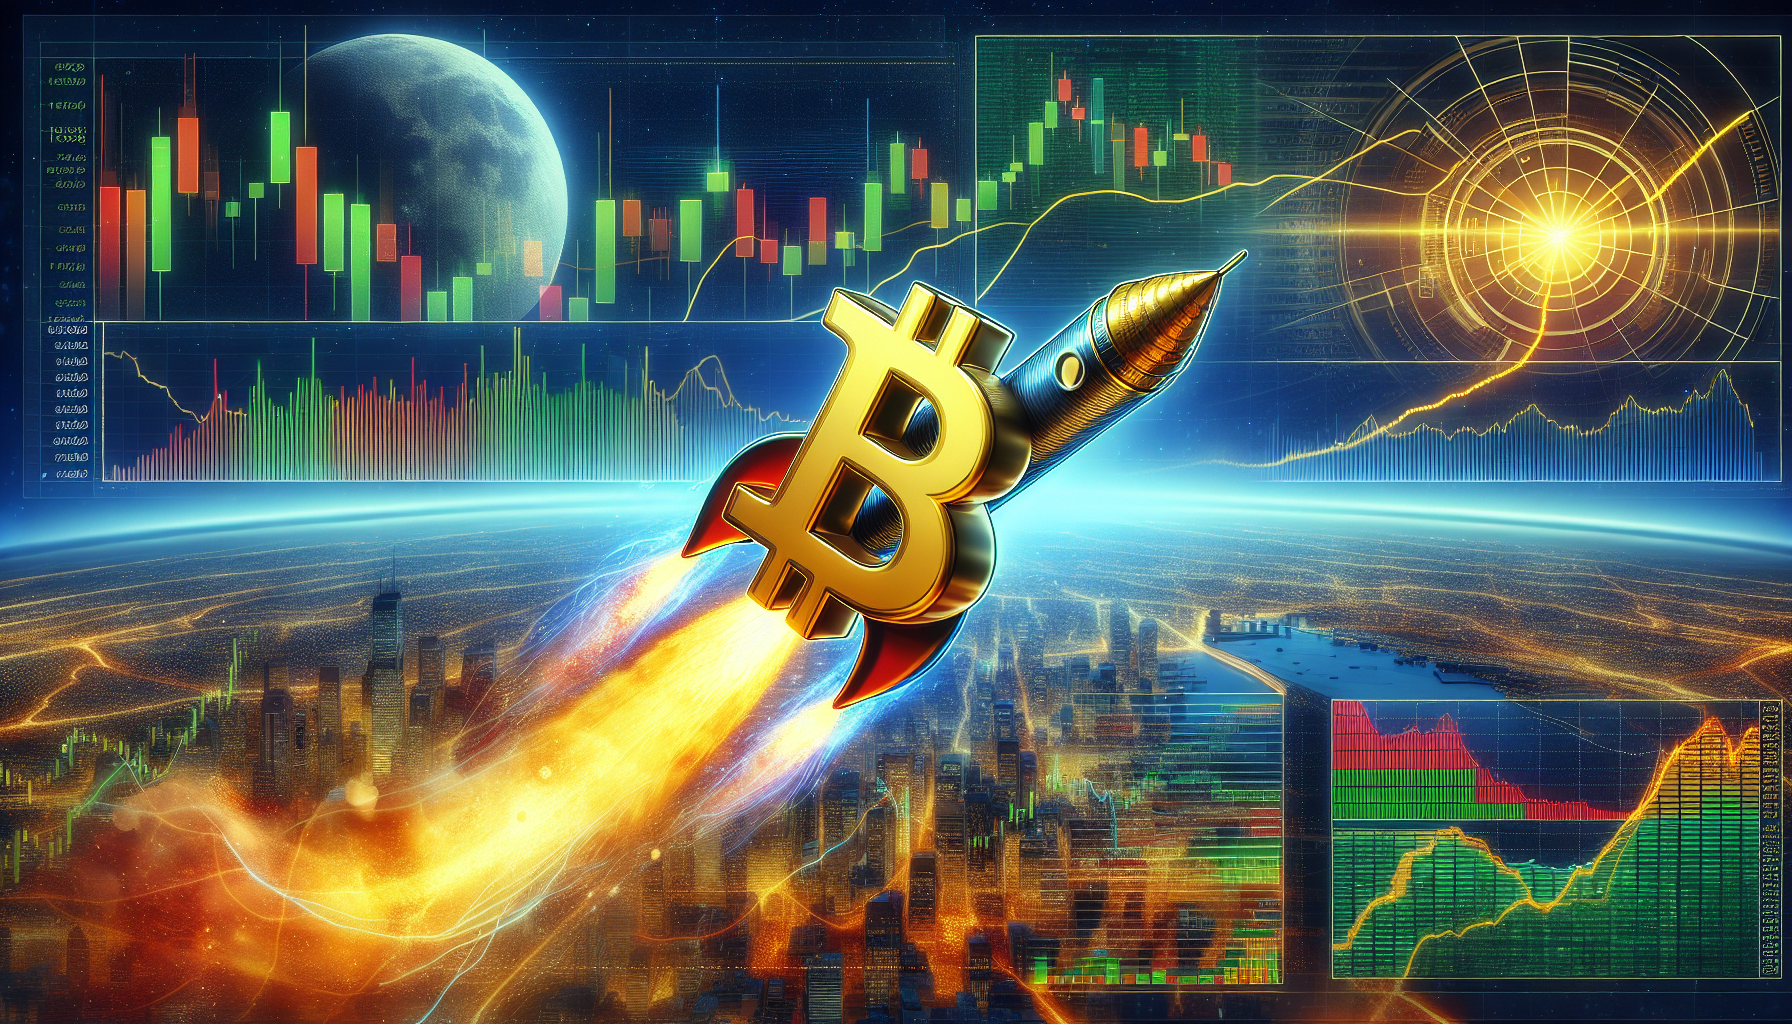 Understanding the factors driving the surge in Bitcoin's price